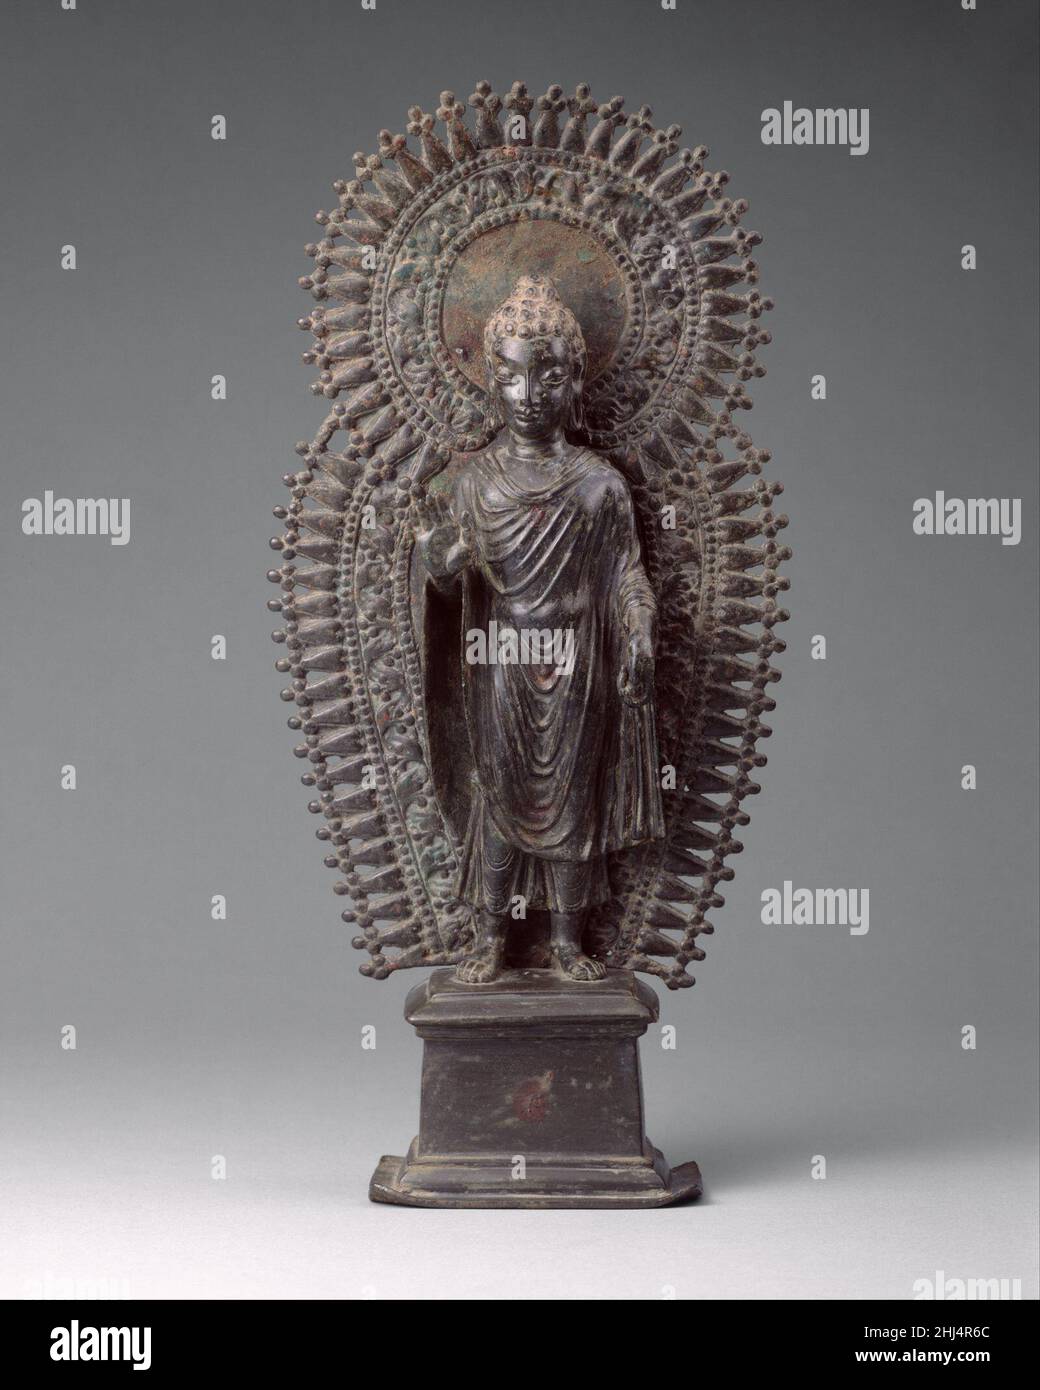 Standing Buddha with Radiate Combined Halo ca. late 6th century Pakistan (ancient region of Gandhara) A few small personal images from Gandhara representing the Buddha have survived. This metal image blends elements seen in the stone sculpture of Gandhara with the Gupta style of north India. Its portability made it an important vehicle for disseminating the Gandharan style to other parts of Asia.. Standing Buddha with Radiate Combined Halo  39165 Stock Photo